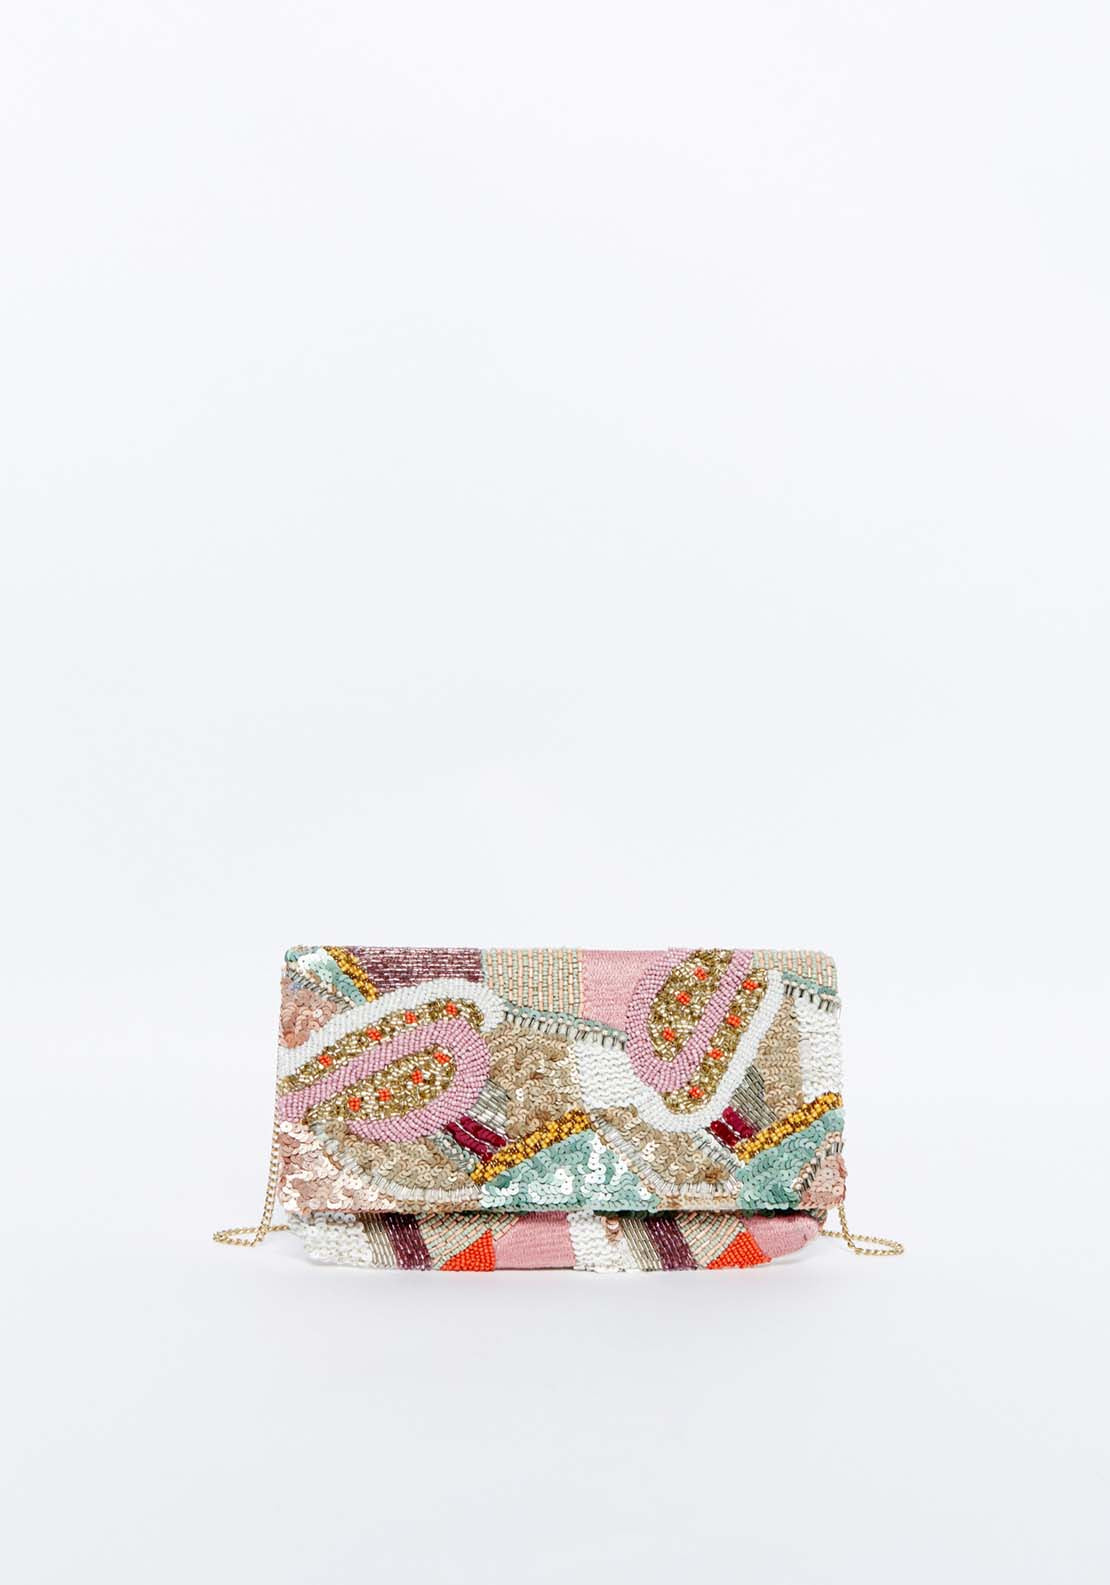 Sfera Beads abstract envelope bag 1 Shaws Department Stores